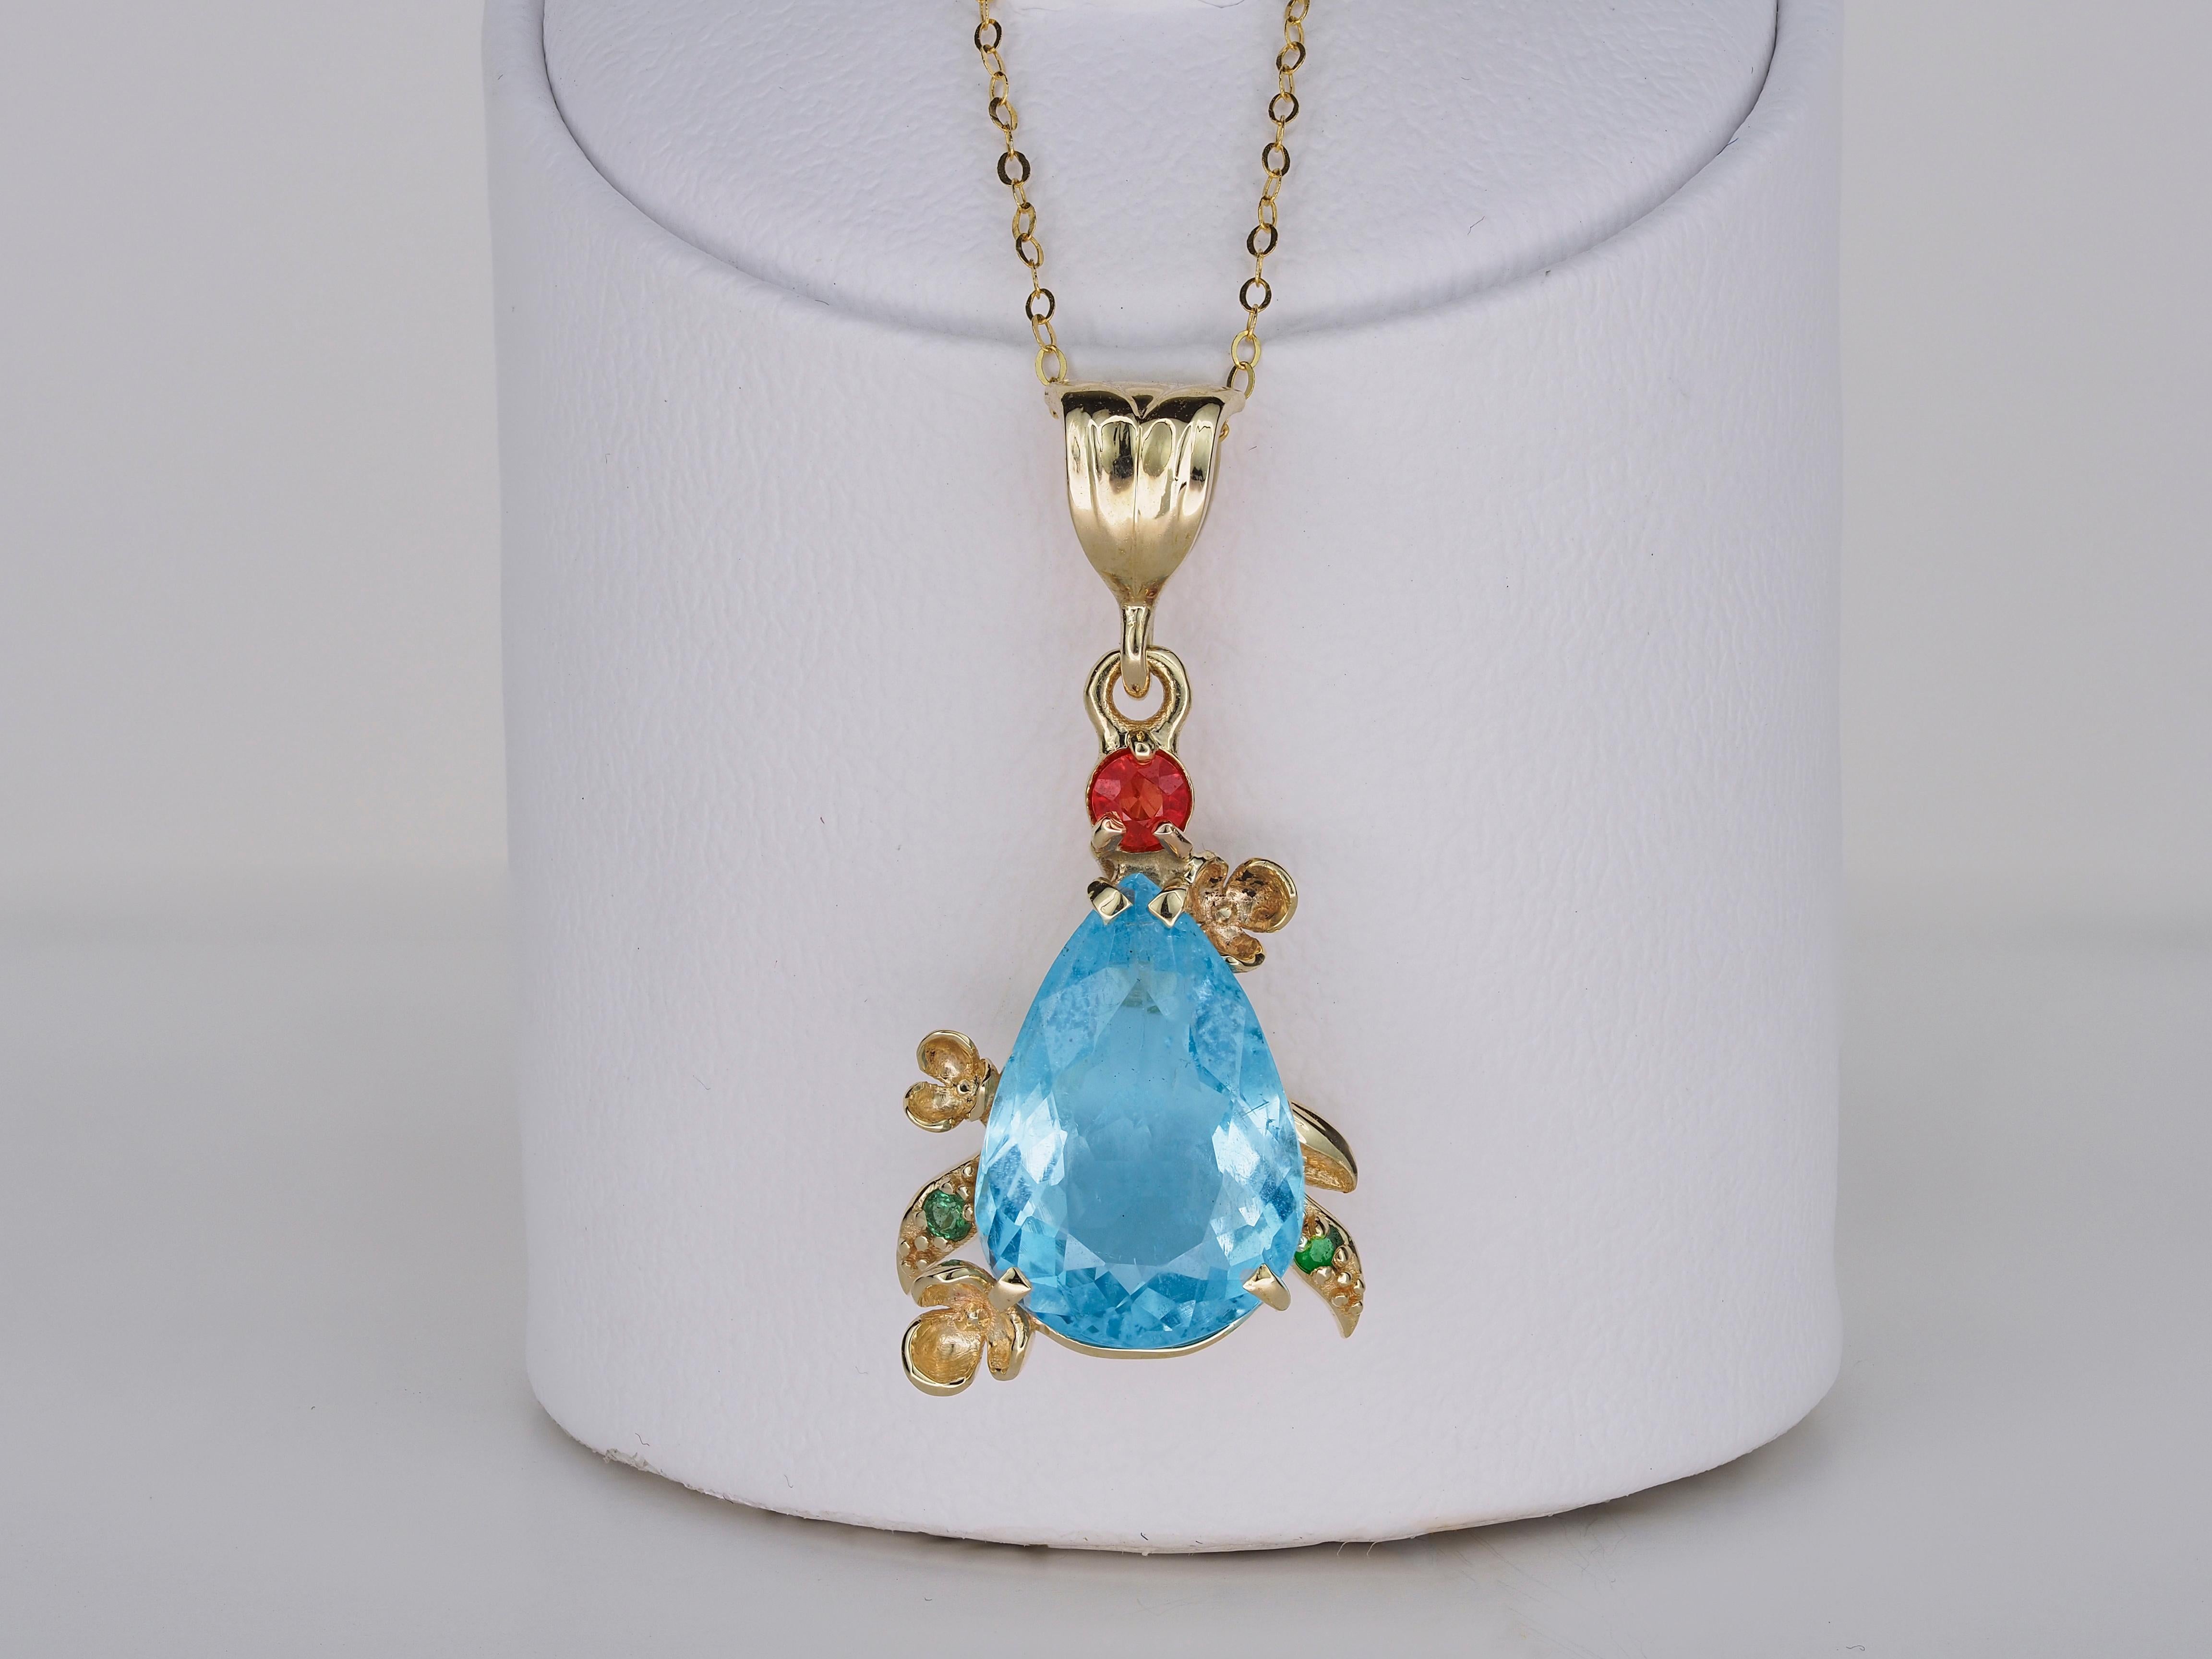 Pear topaz pendant in 14 karat gold.  Flower design pendant with natural topaz. Novemvber birthstone topaz pendant.

14 karat gold
Weight: 2.75 g.
Pendant size: 30x14.5 mm 

Set with topaz, color - sky blue
pear cut, aprox 5 ct 
Clarity: